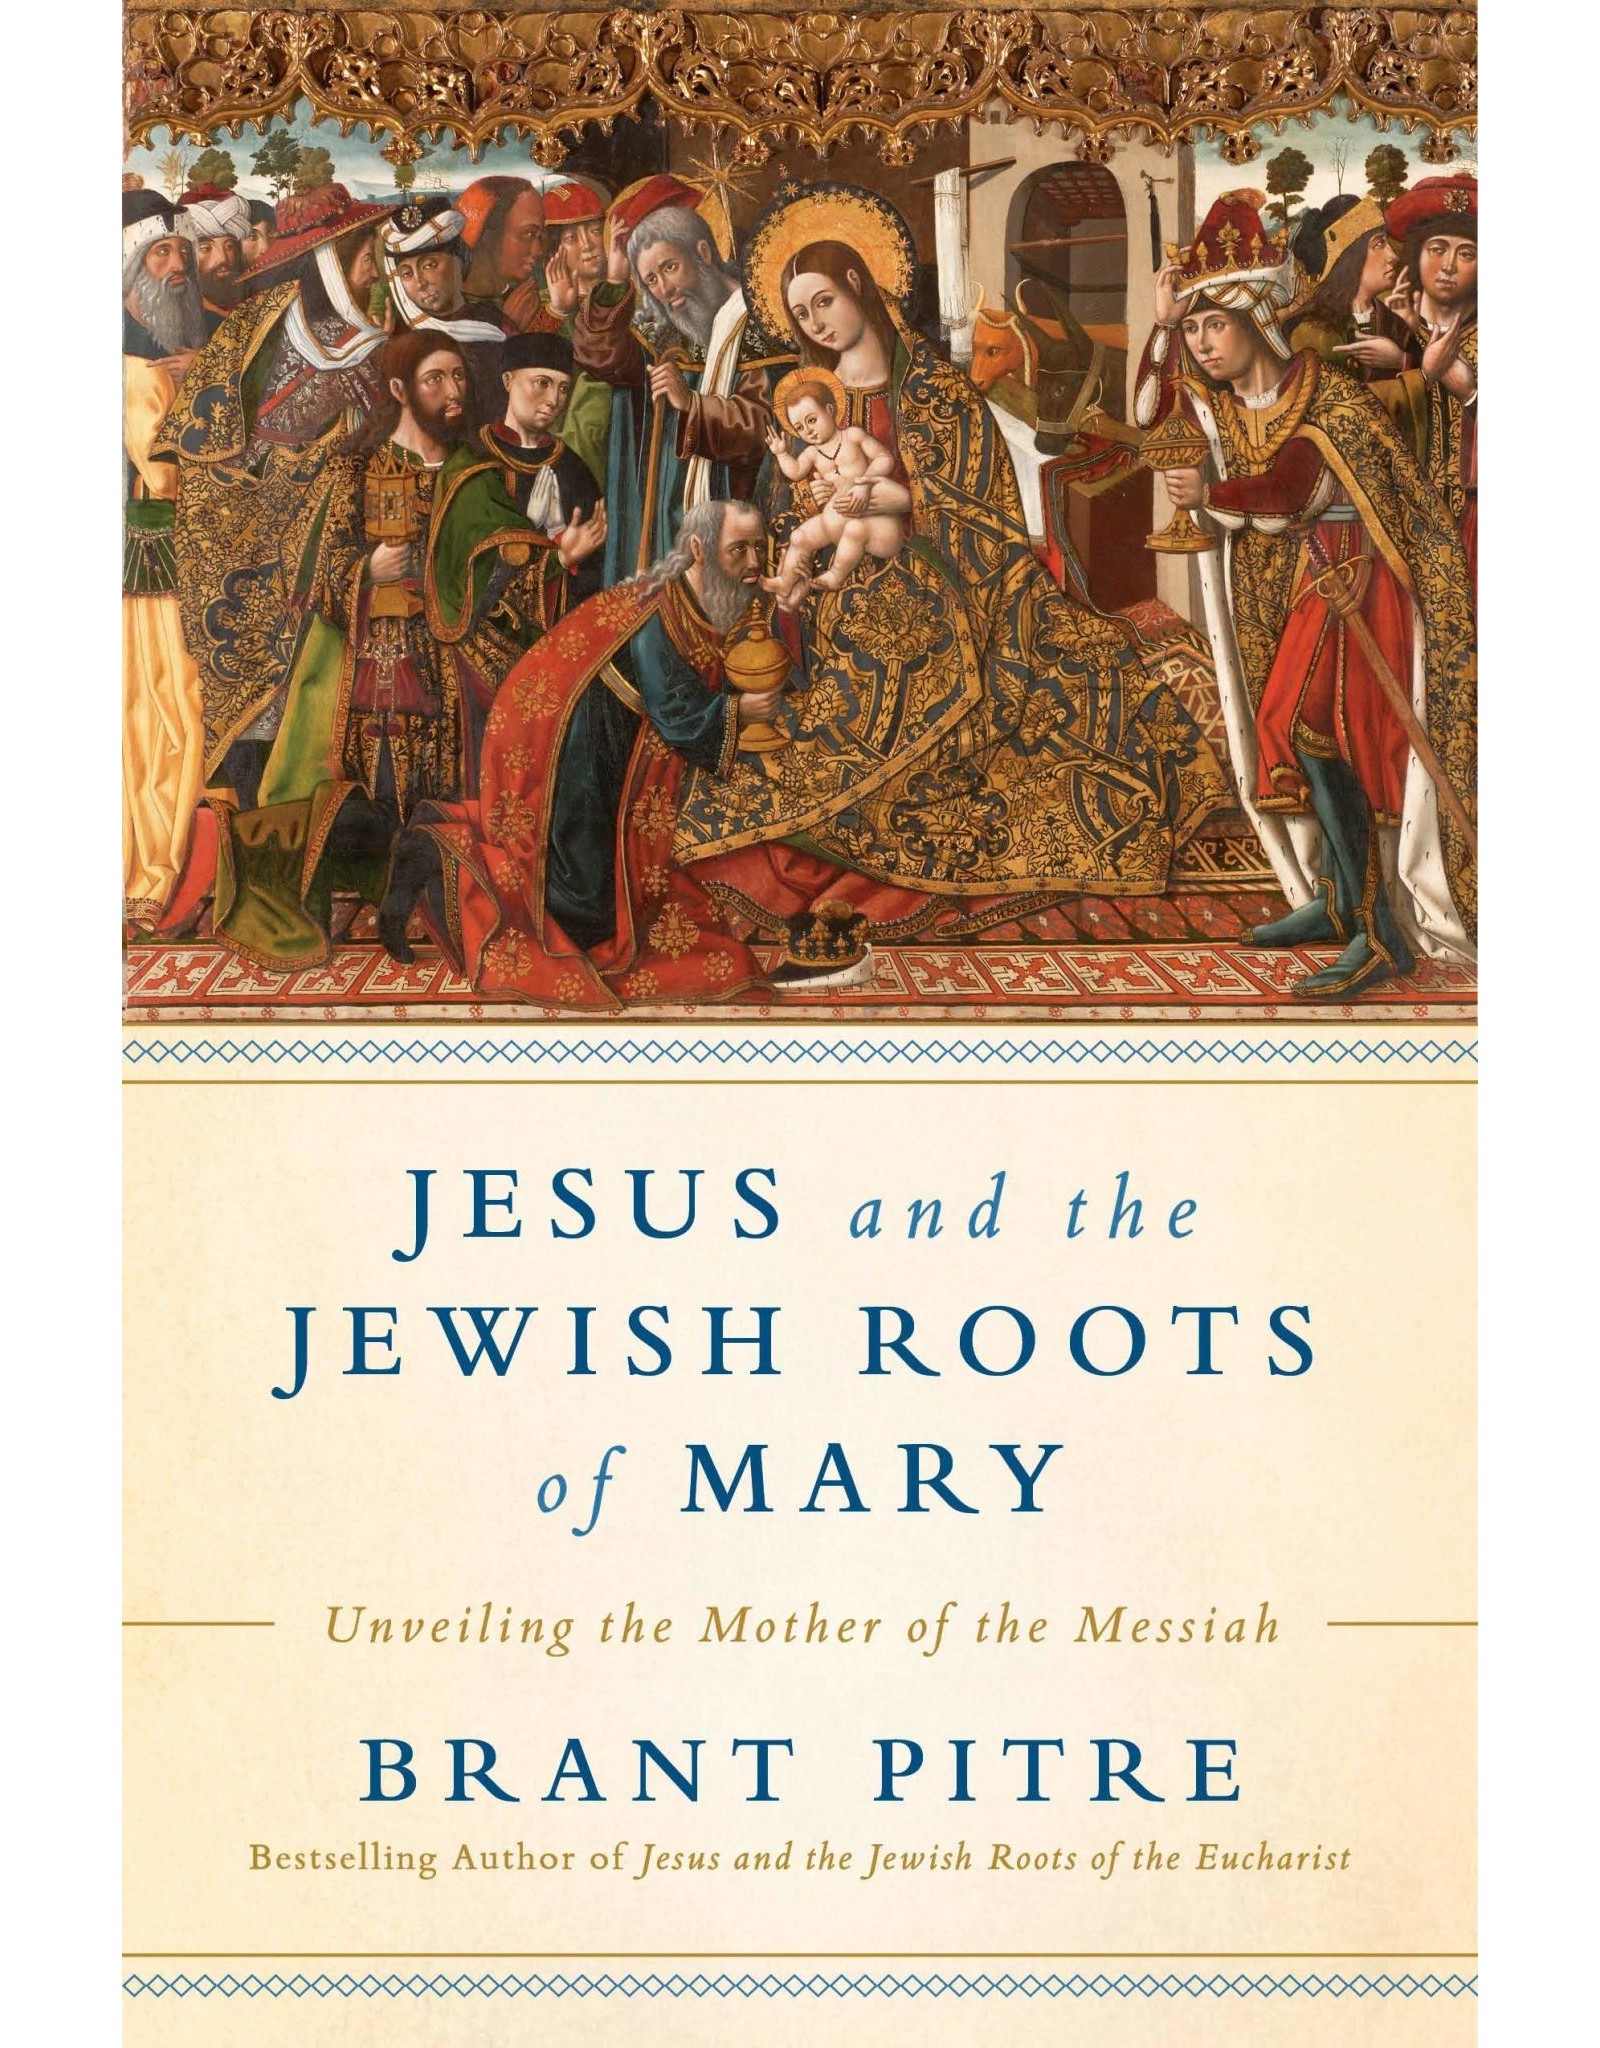 Image Jesus & the Jewish Roots of Mary: Unveiling the Mother of the Messiah